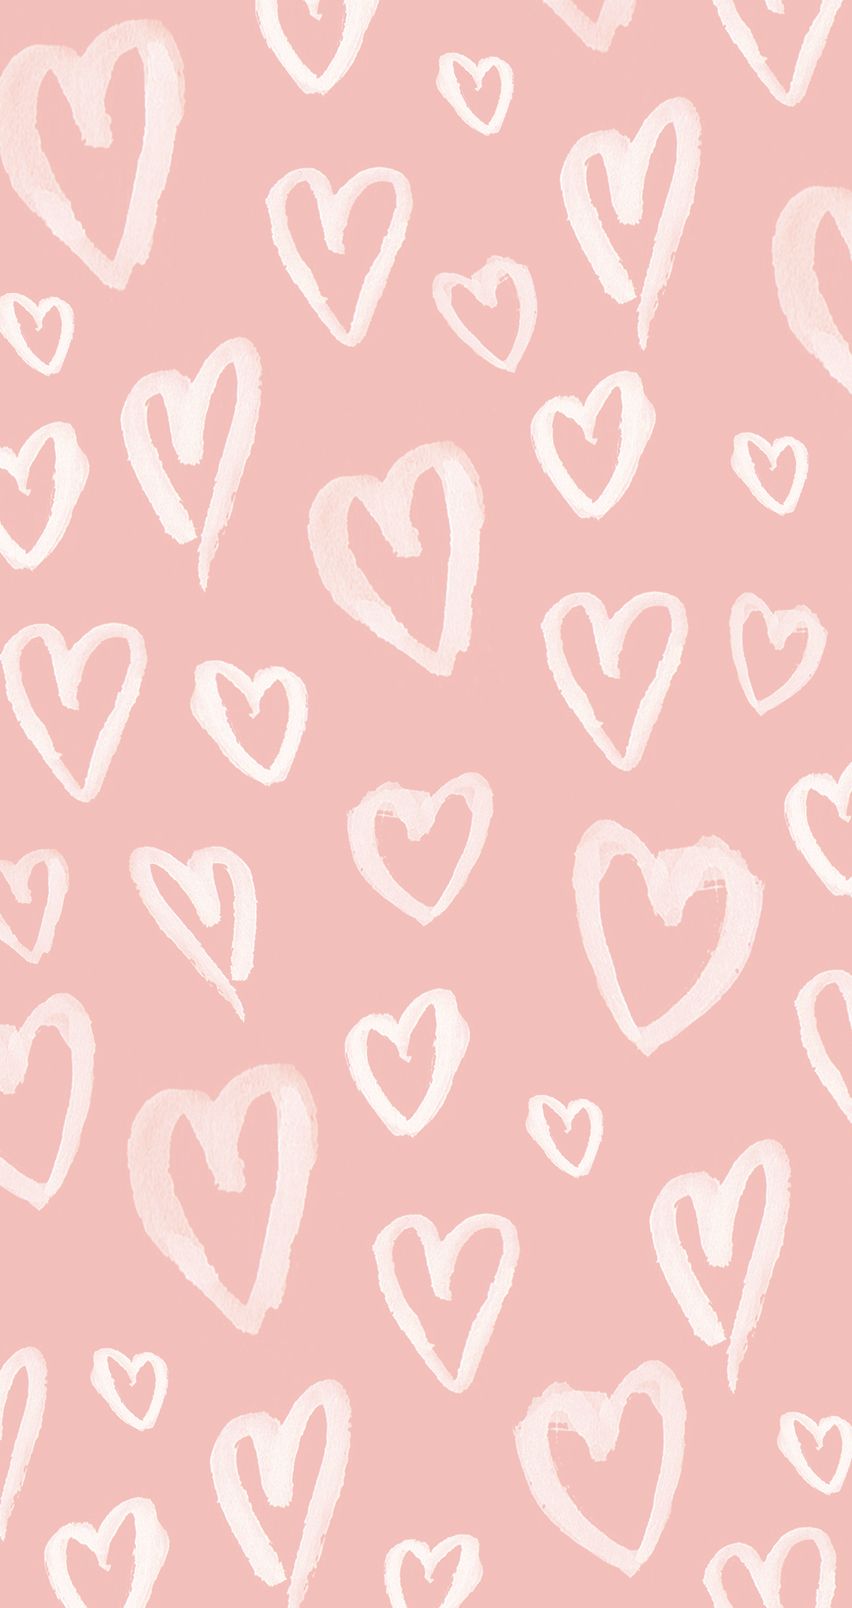 Pink, Wallpaper, And Background Image - Instagram Story Icons One By One -  720x1280 Wallpaper 